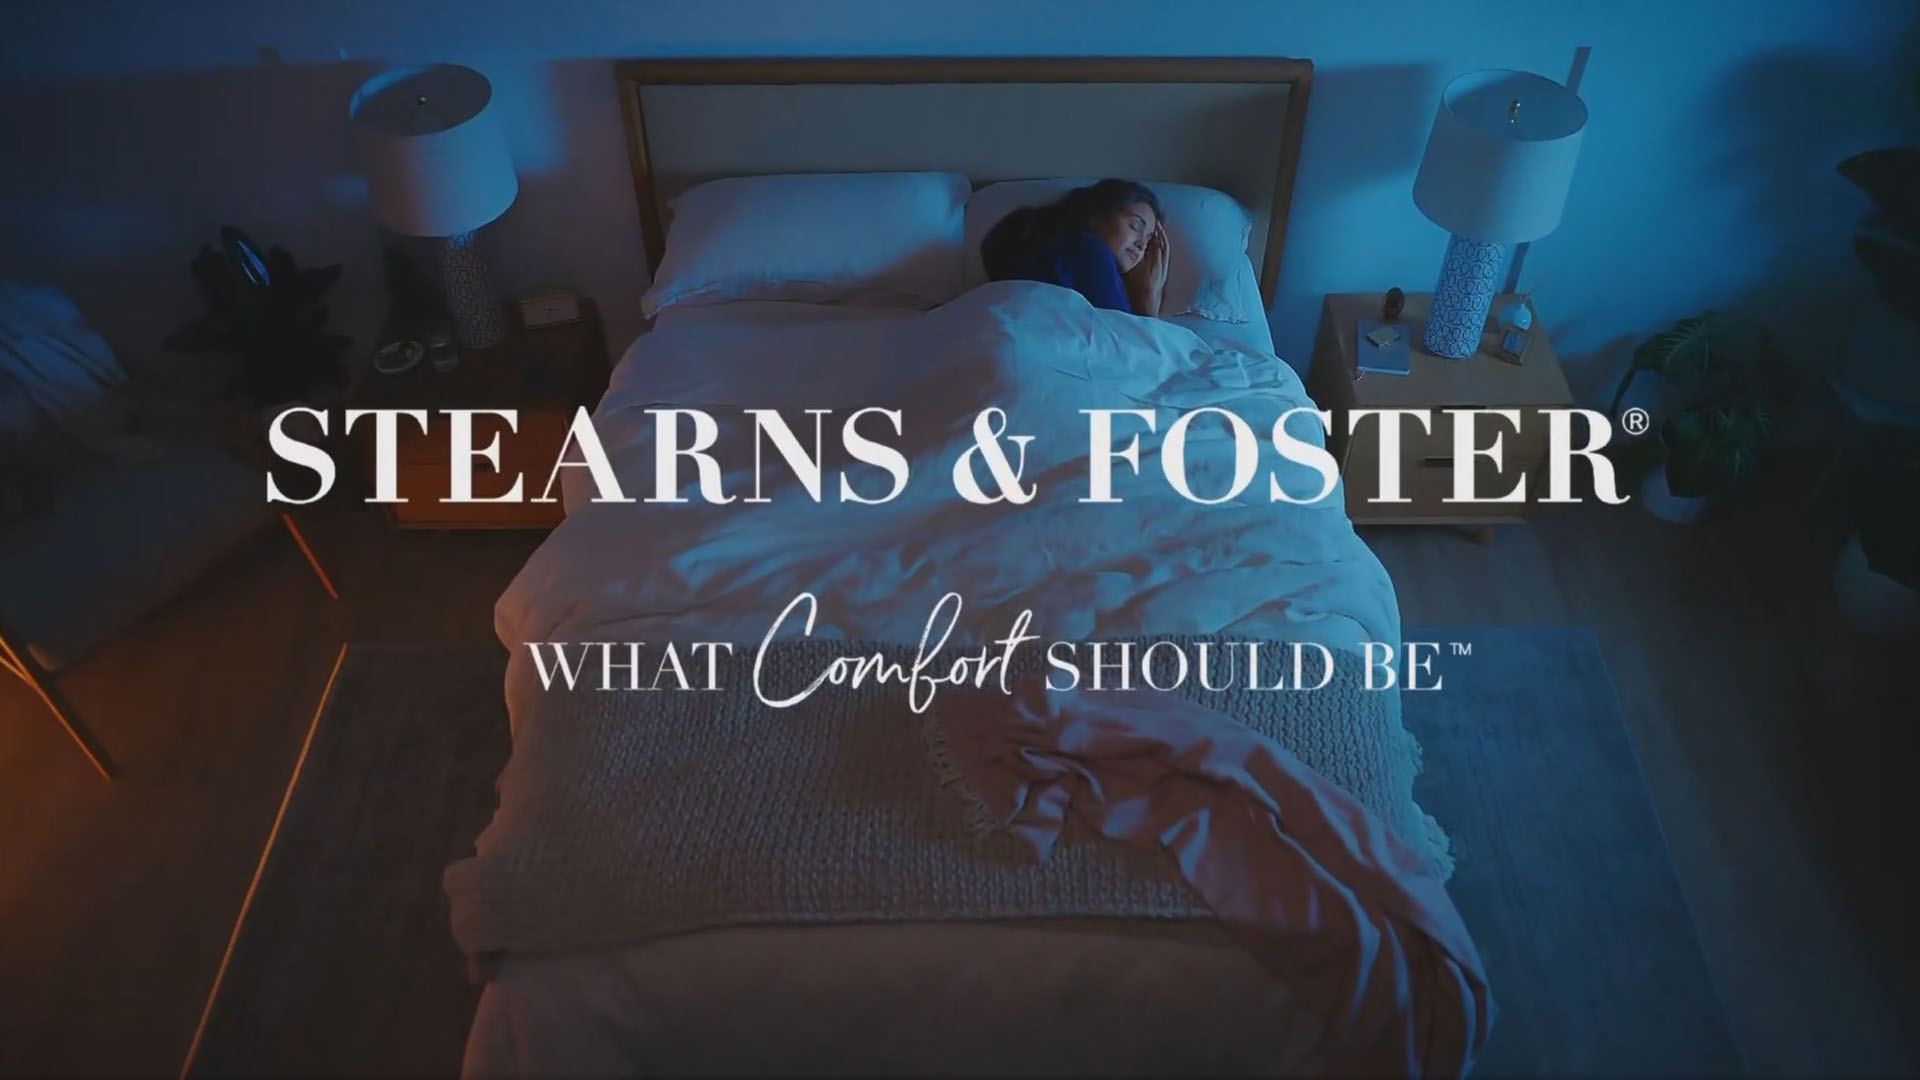 Stearns & Foster mattresses are known for their quality construction and premium materials